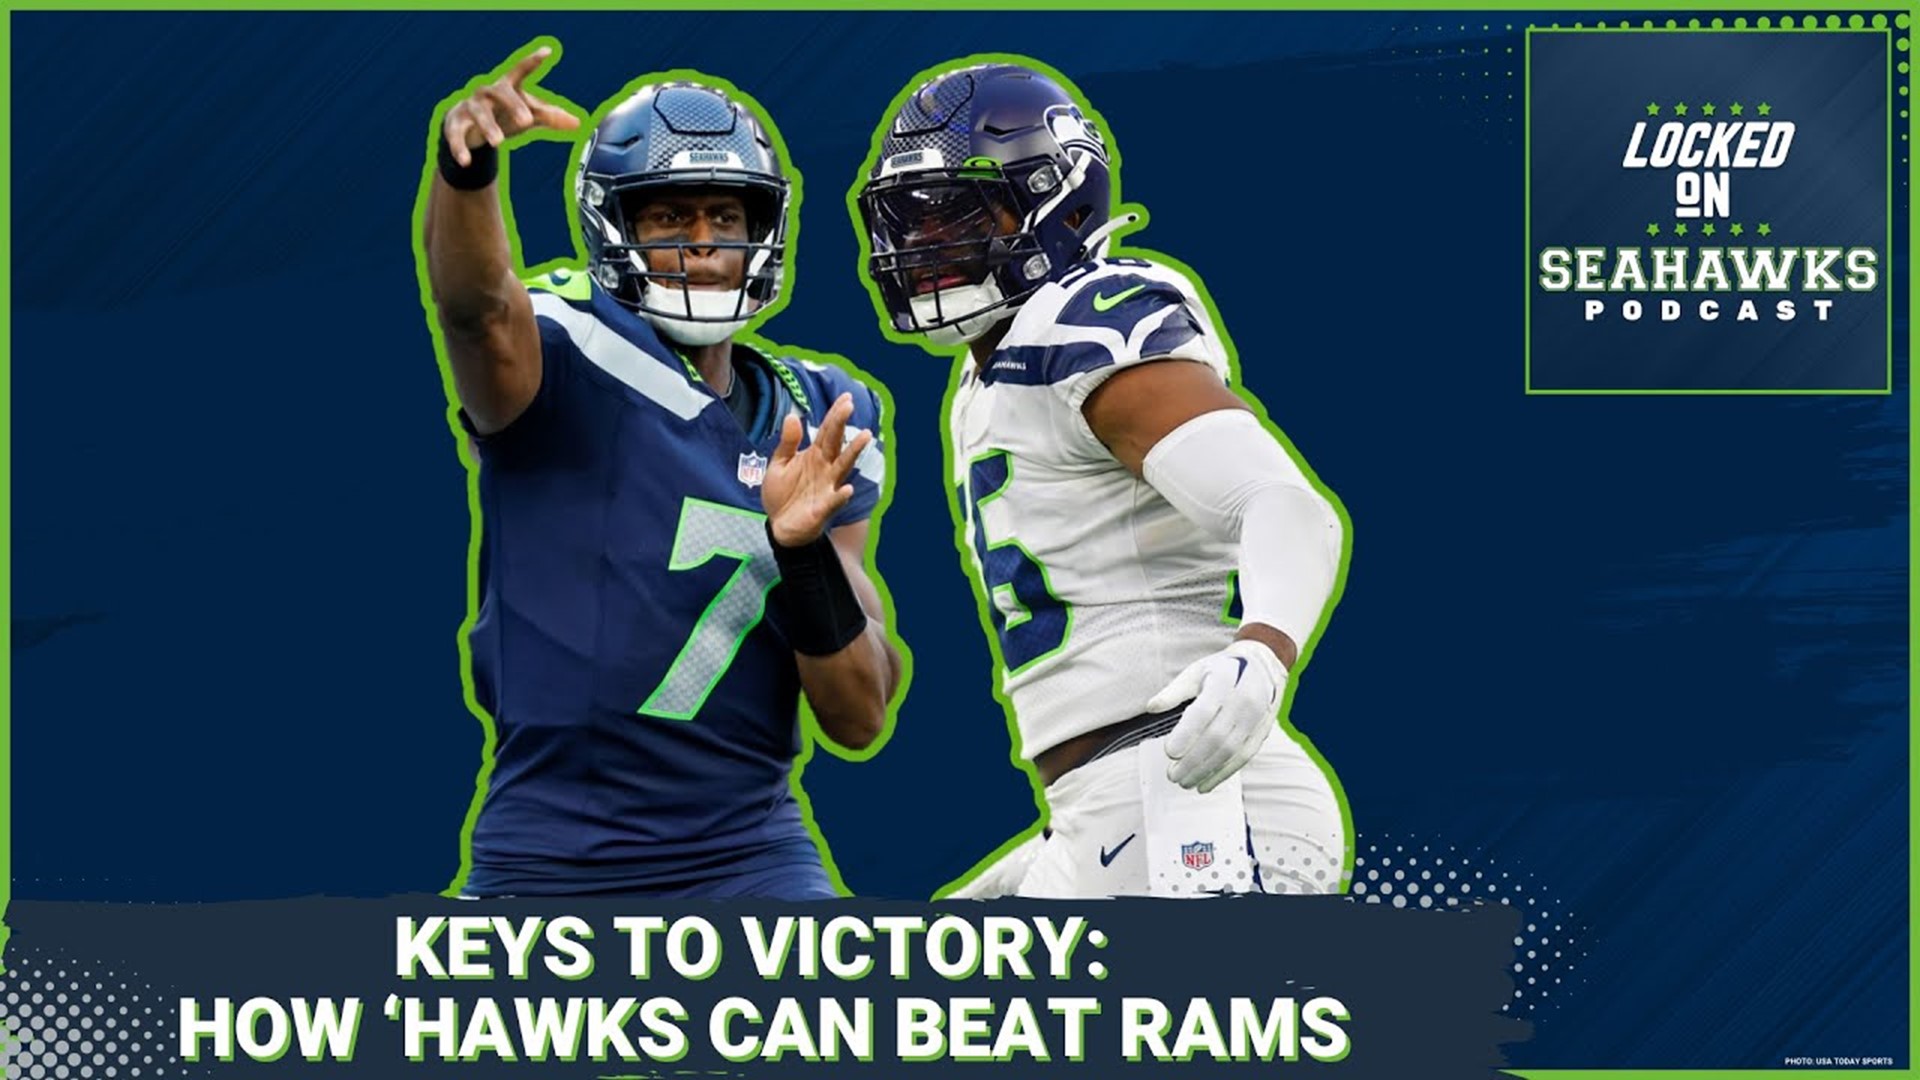 After months of anticipation, the Seahawks will finally kick off a new season with the NFC West rival Rams traveling to Lumen Field for an intriguing Week 1 battle